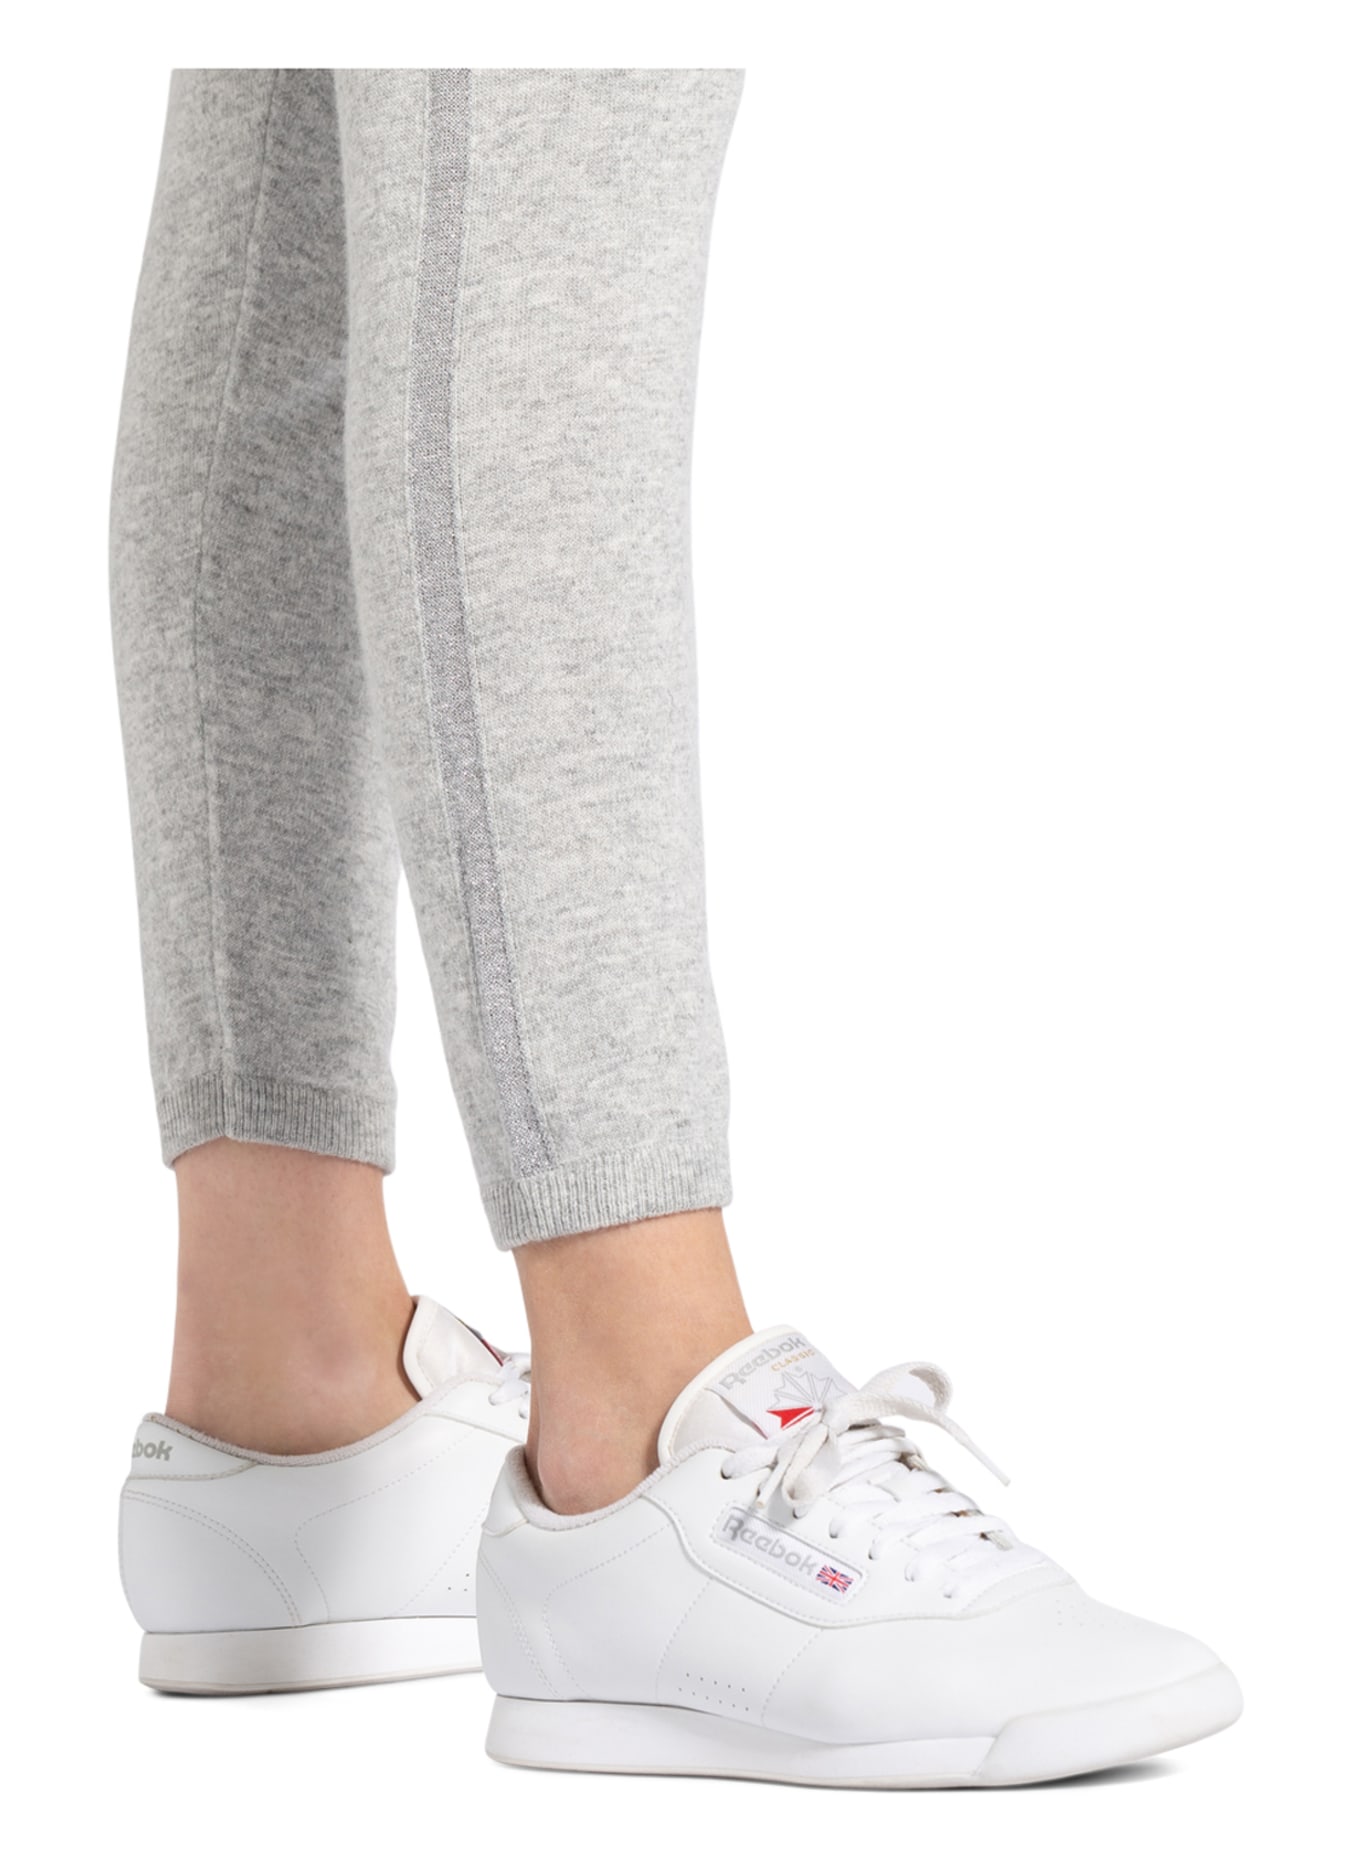 DEHA Knit fitness trousers, Color: LIGHT GRAY (Image 5)